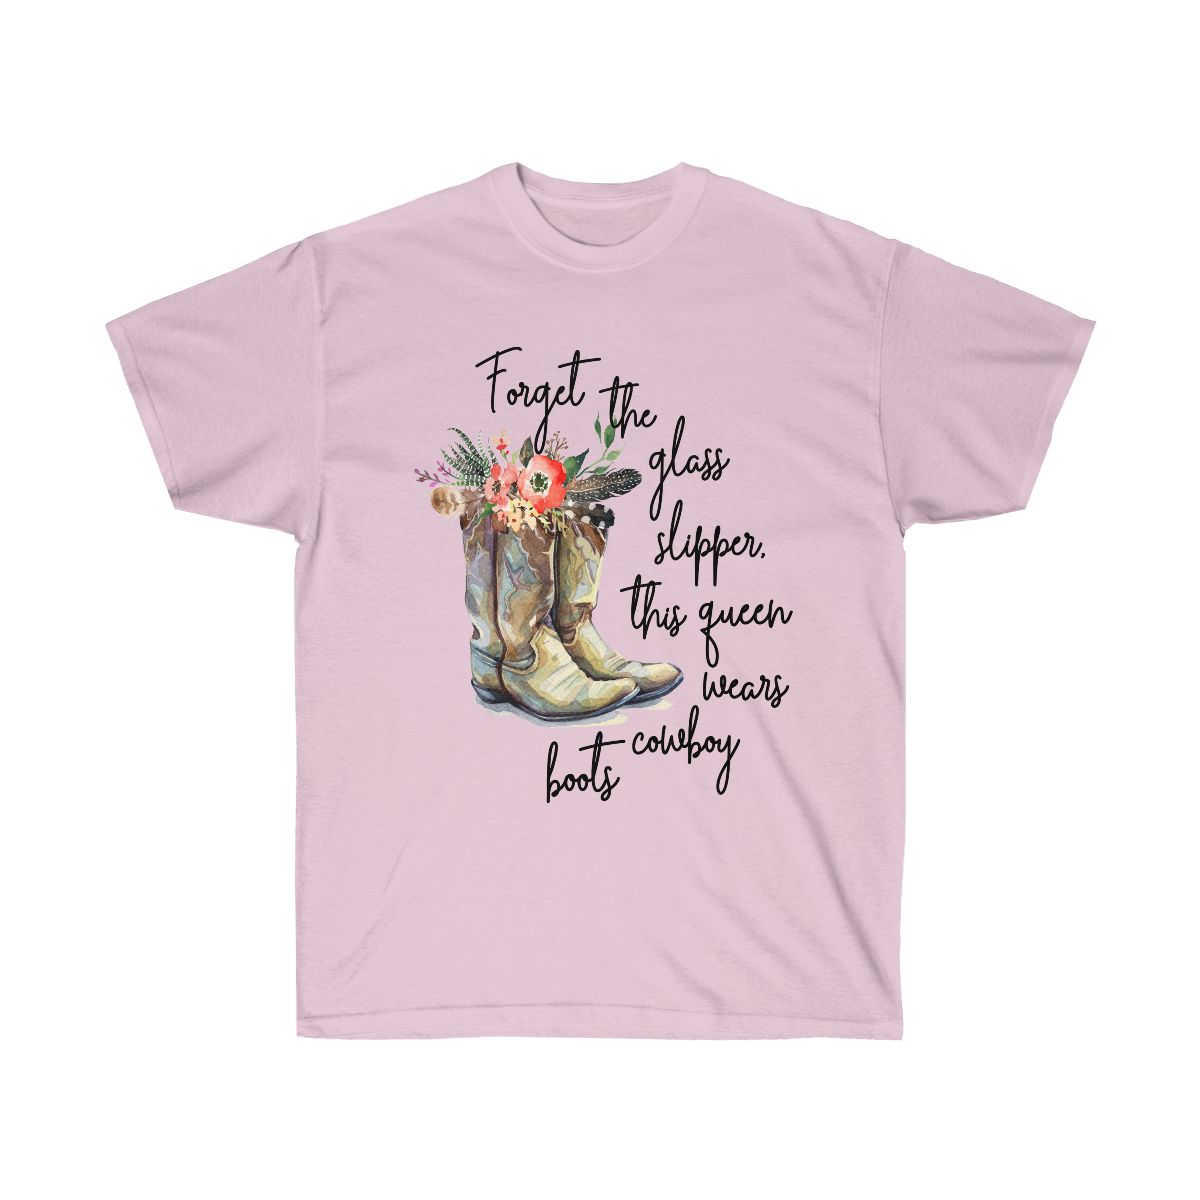 This Queen Wears Boots - Unisex Ultra Cotton Tee